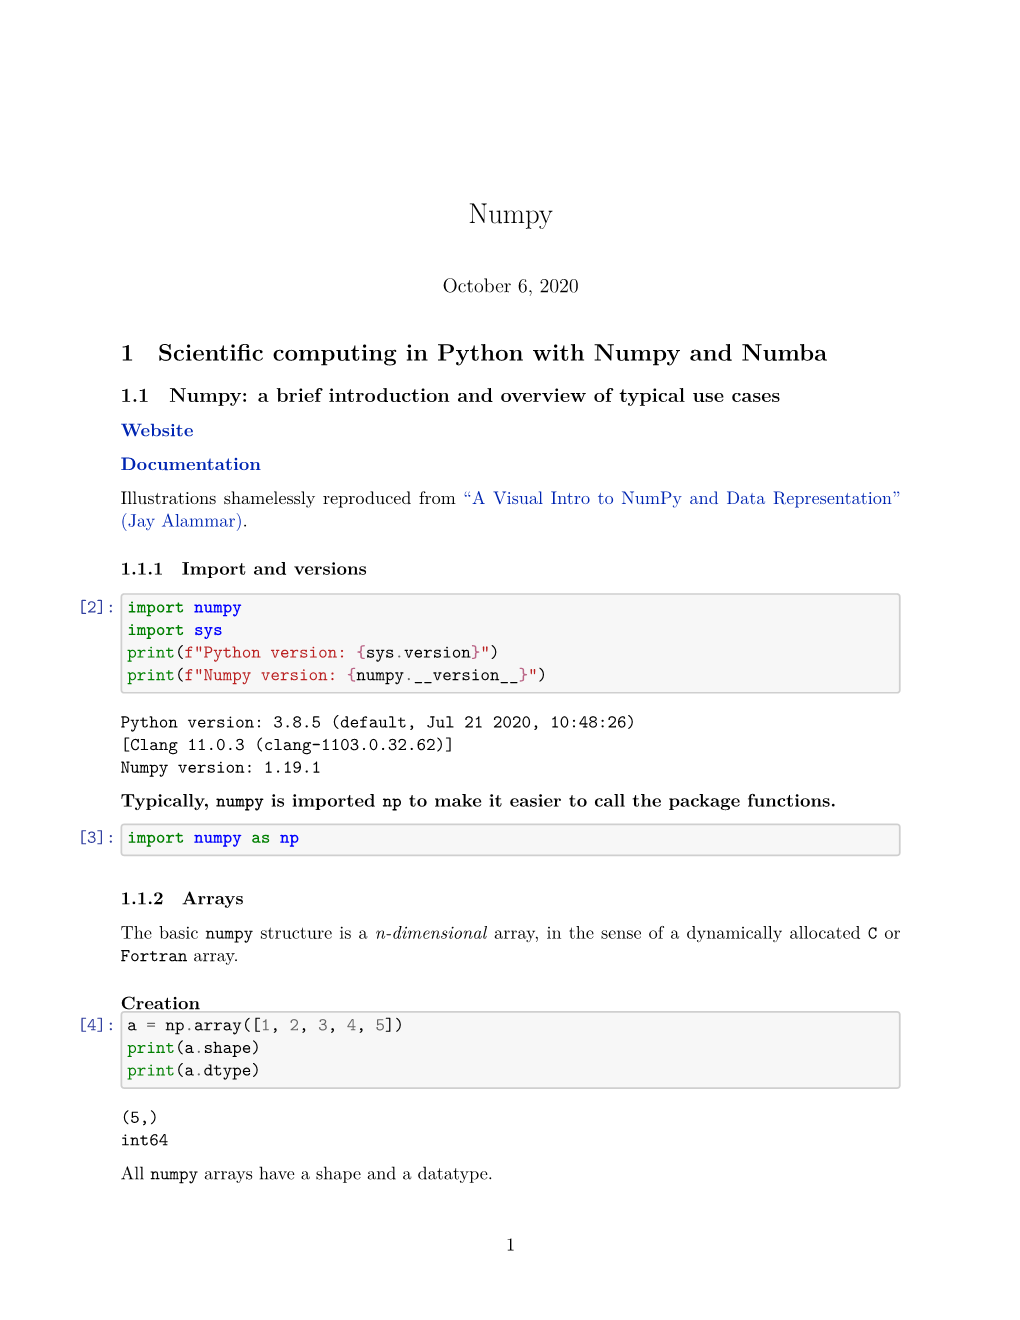 1 Scientific Computing in Python with Numpy and Numba